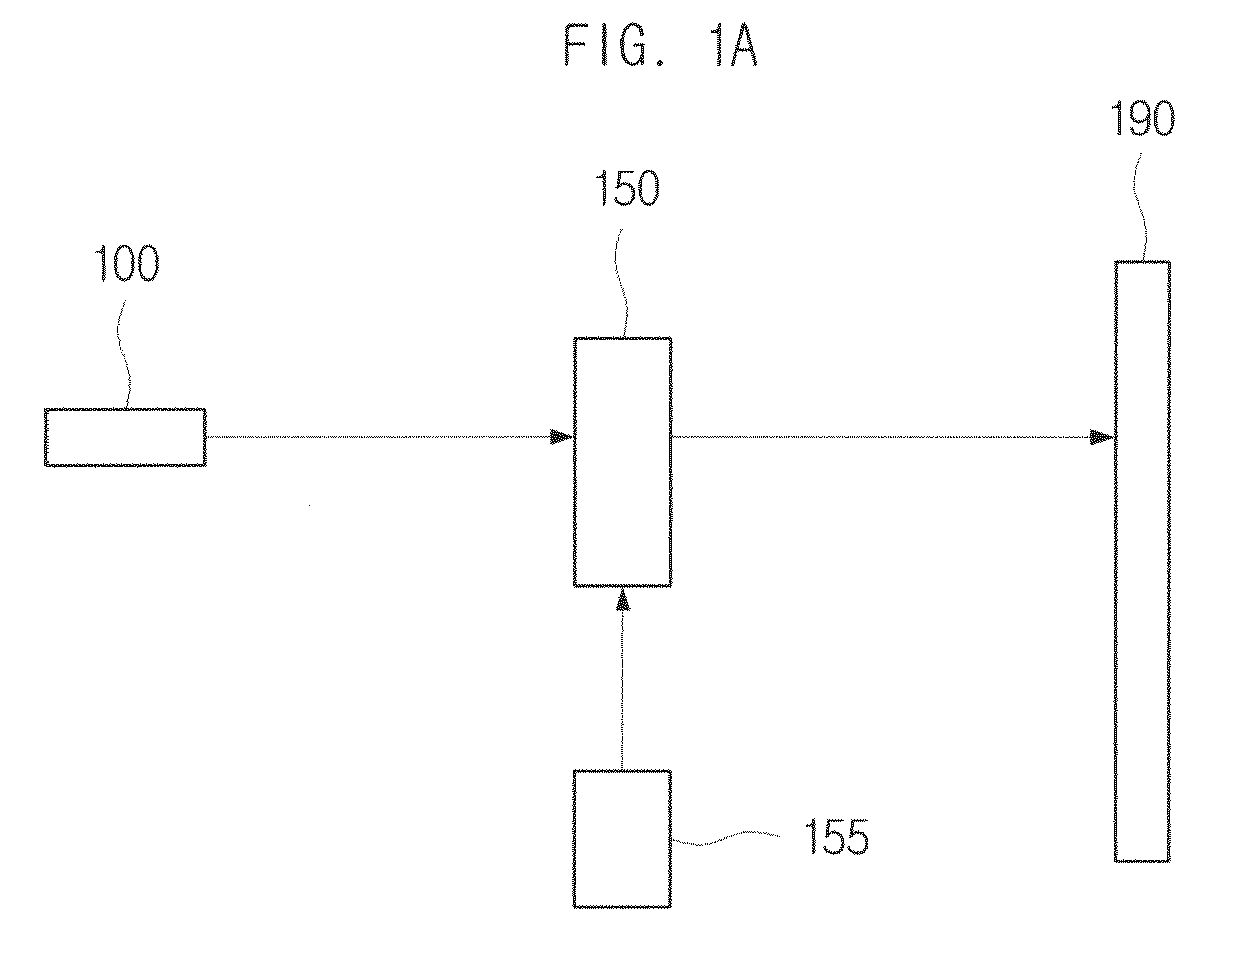 Projection display apparatus for suppressing speckle noise